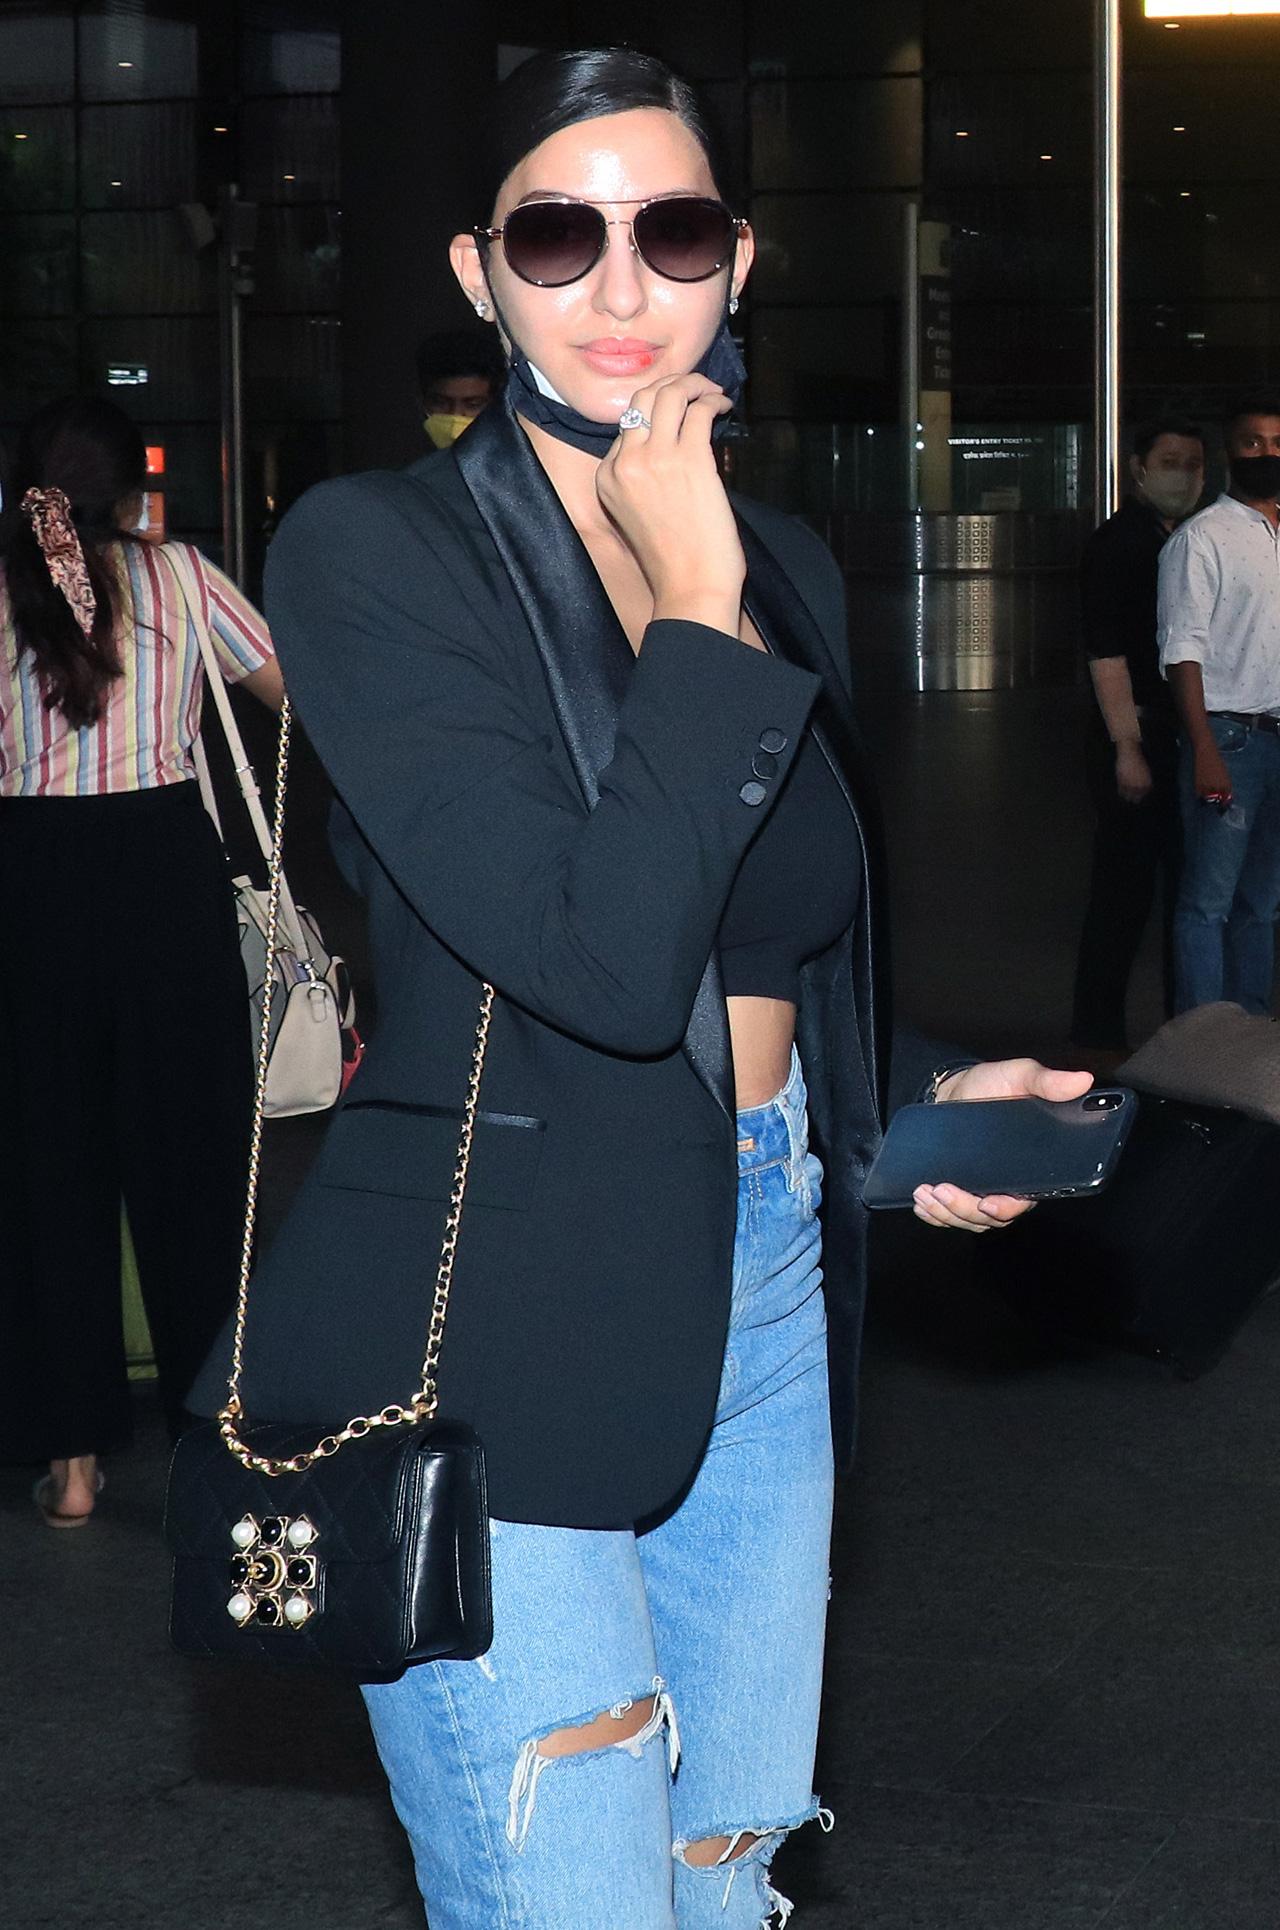 Nora Fatehi returns from Bengaluru where she was part of a special episode of Dance Deewane 3. The reality show is being shot due to the lockdown in the state.